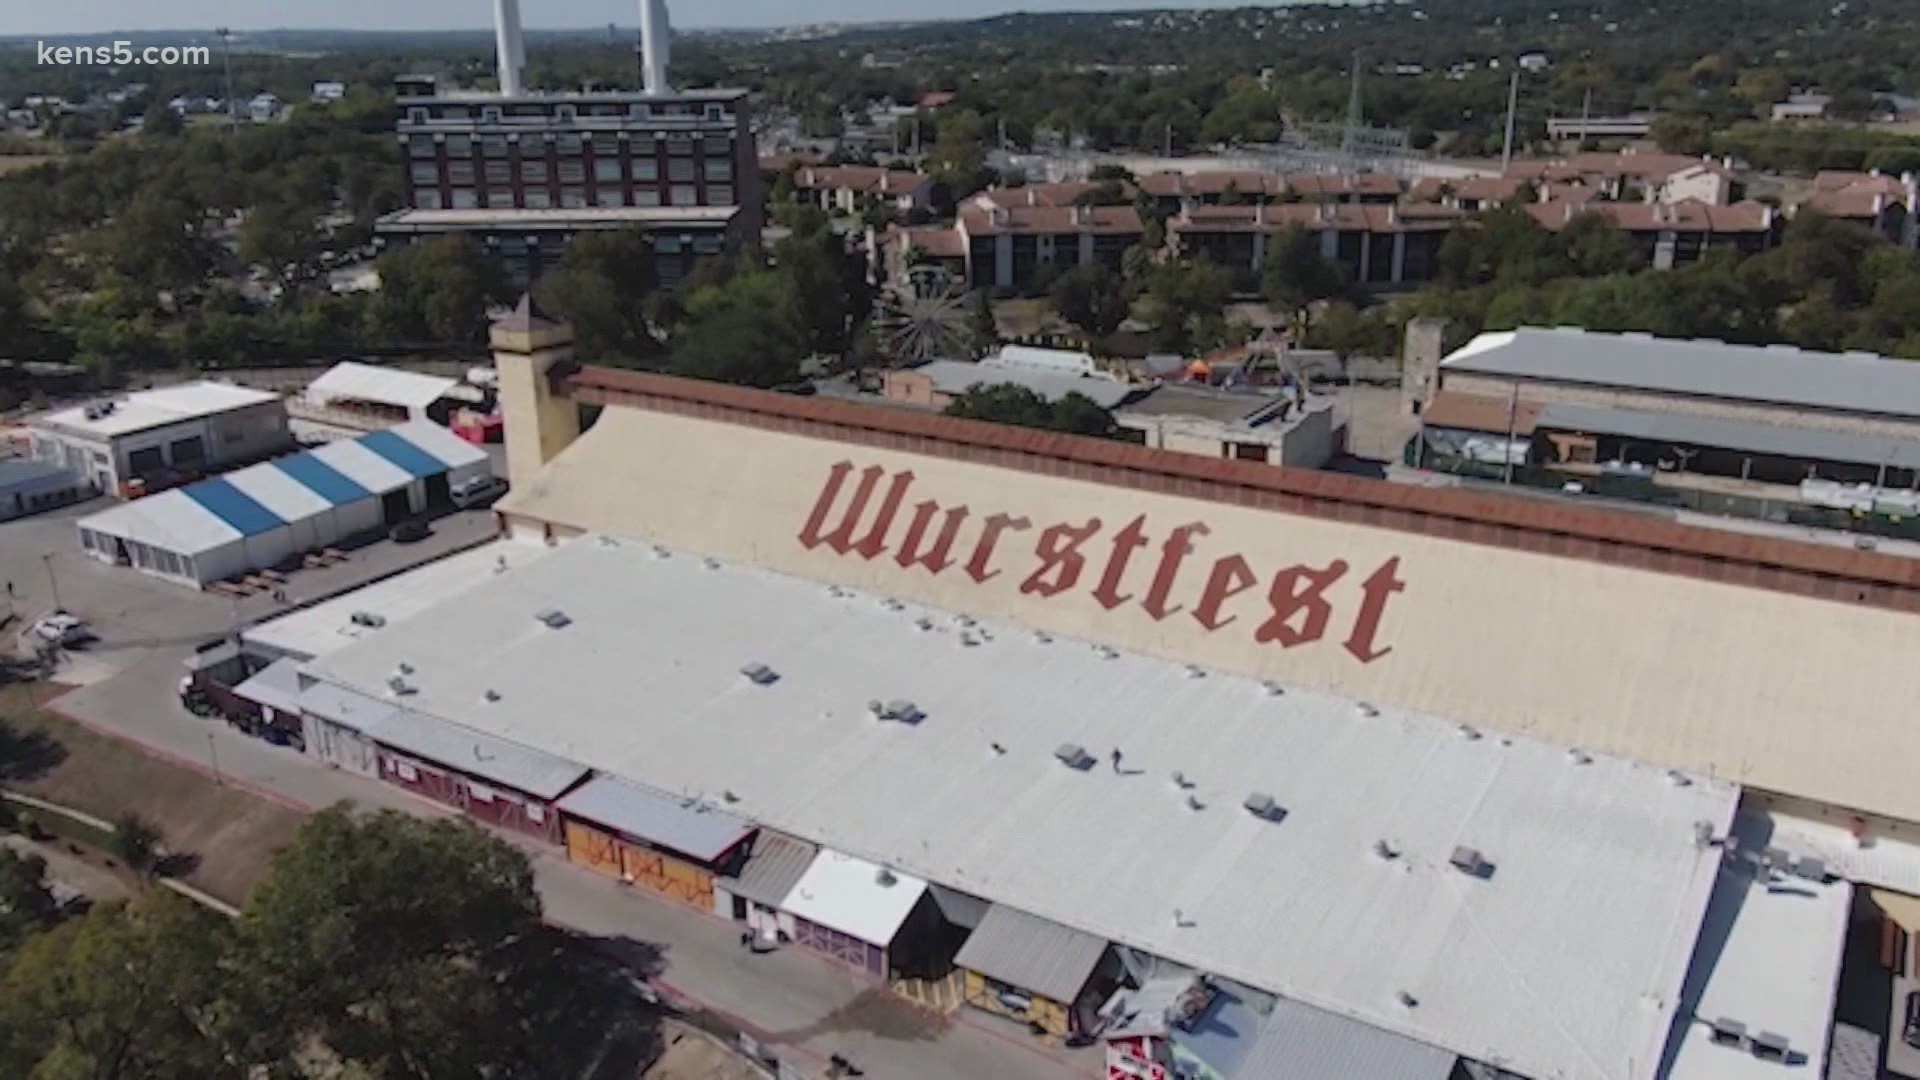 "When it’s fall in New Braunfels, everyone’s attention turns to Wurstfest,” said Suzanna Herbelin Executive Director of the Wurstfest Association New Braunfels.